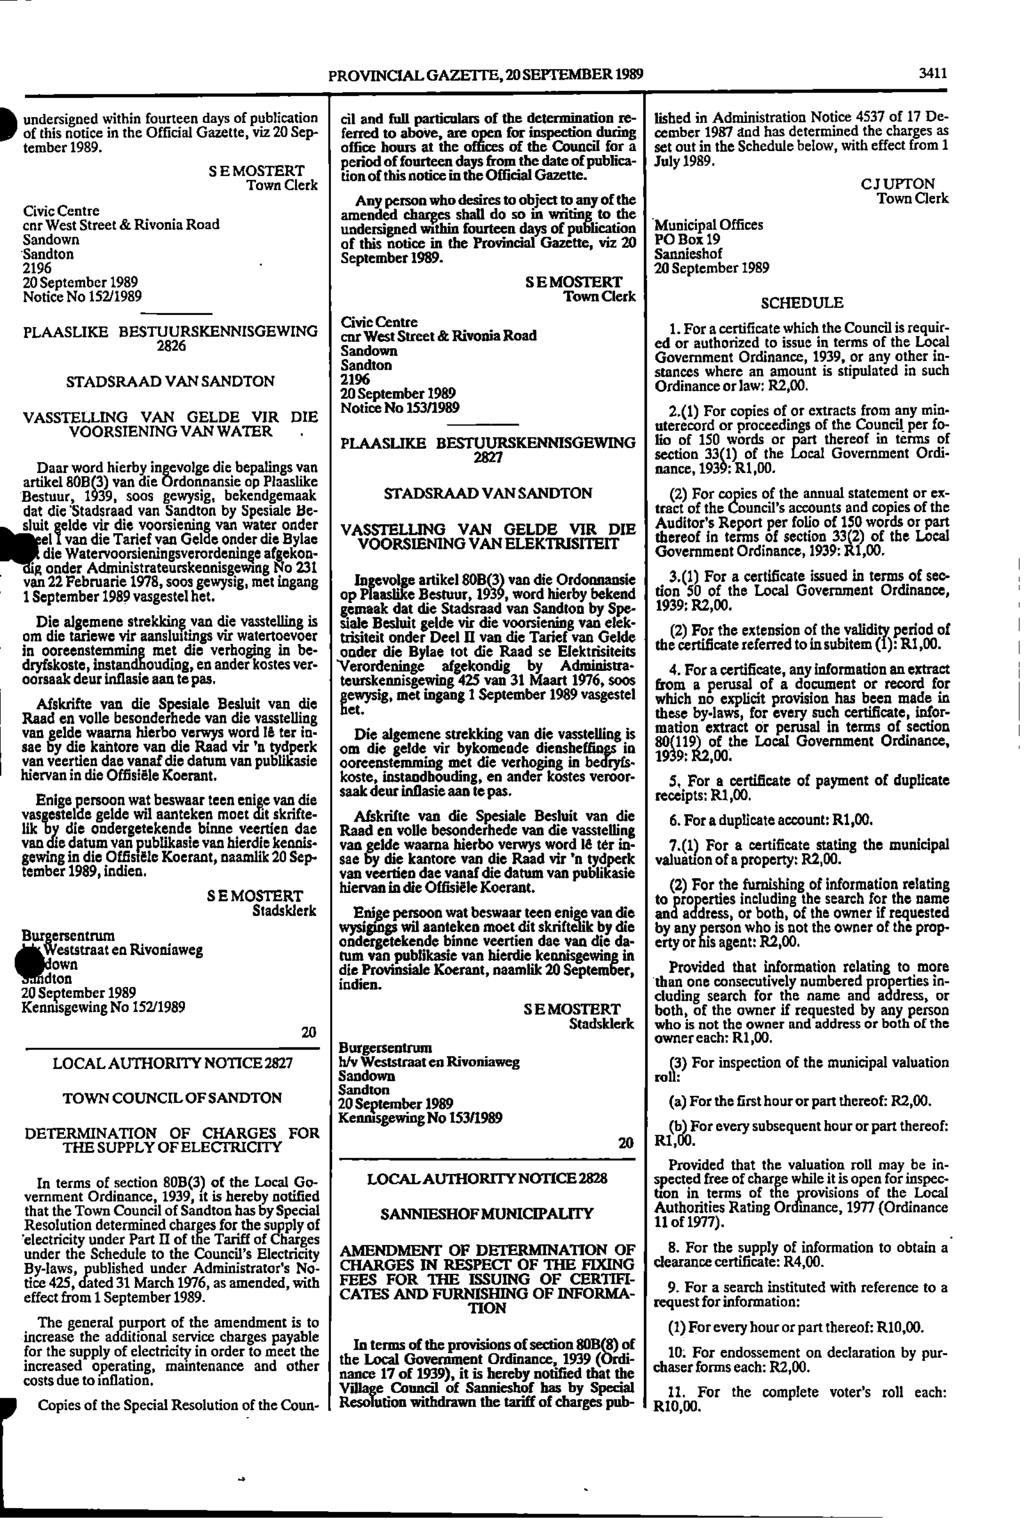 PROVINCIAL GAZETTE, 20 SEPTEMBER 1989 3411 fourteen days of publication ell and full particulars of the determination re fished in Administration Notice 4537 of 17 Deof this notice within in the